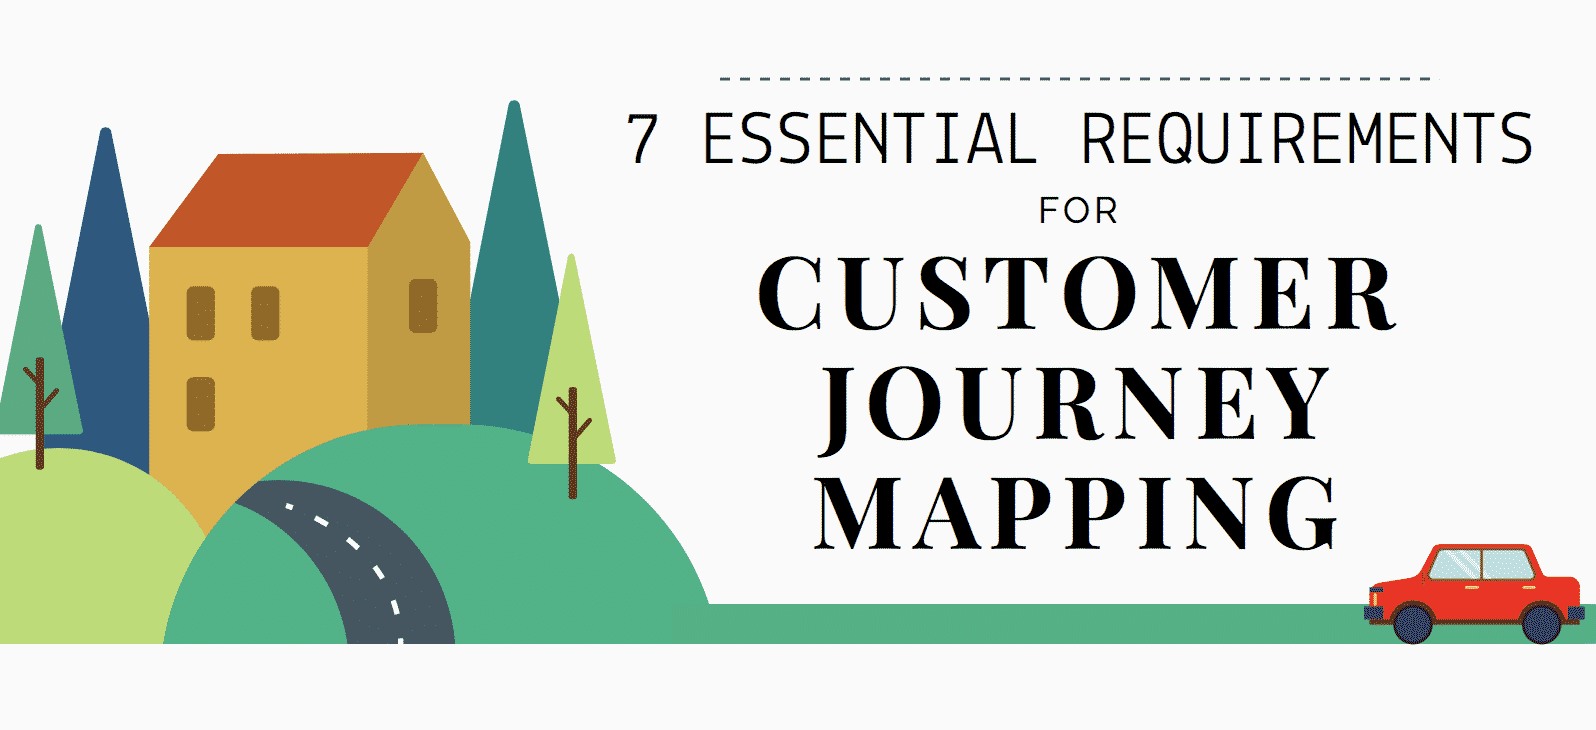 7 Essential Requirements for Customer Journey Mapping